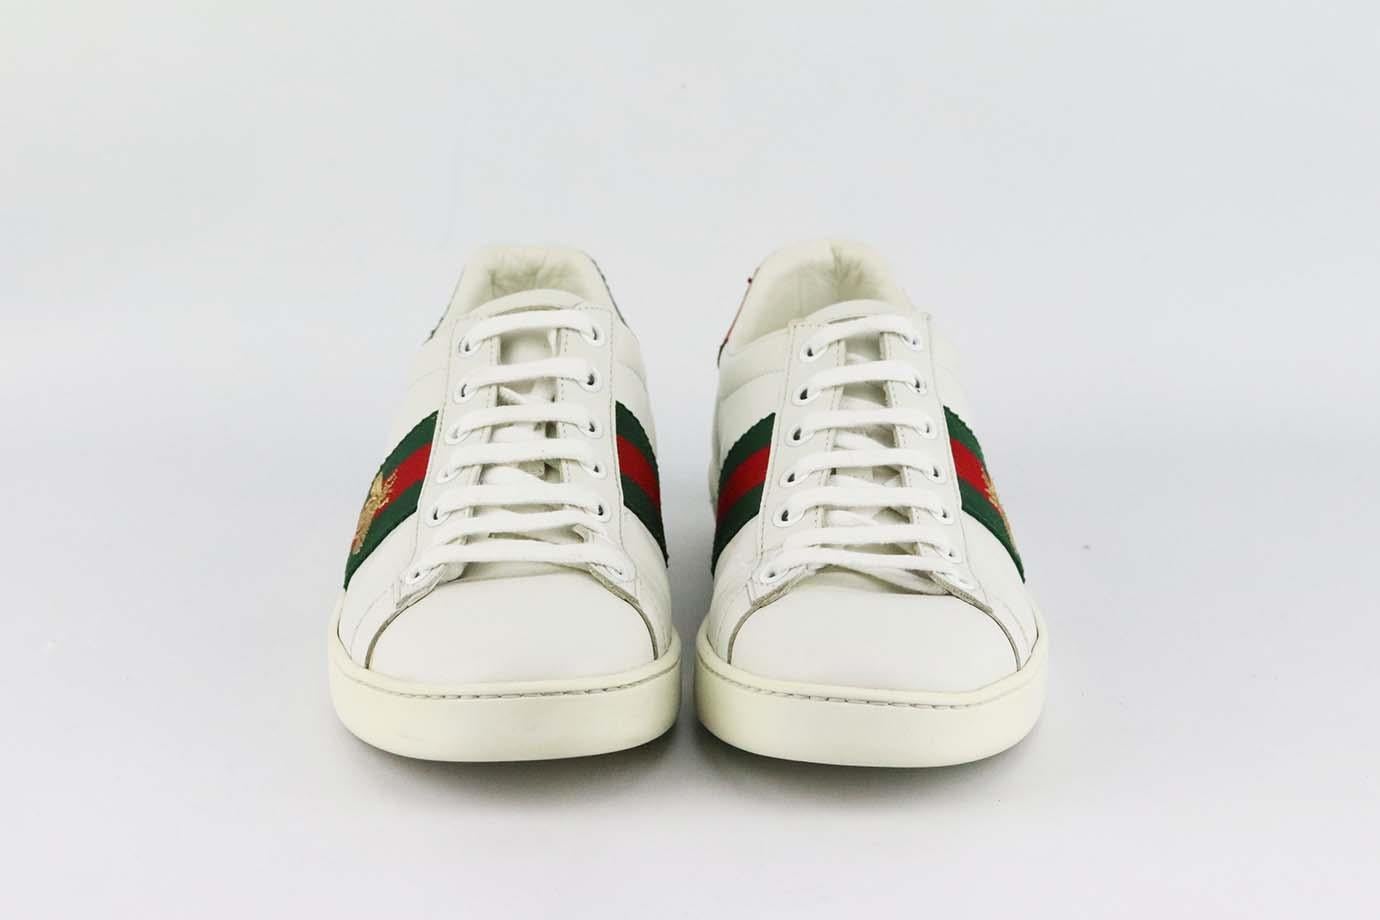 These 'Ace' sneakers by Gucci are a cool, sporty take on the now iconic style, made in Italy from pristine white leather, they have the instantly recognizable green and red webbing that's embroidered with a the brands iconic gold bee. Rubber sole